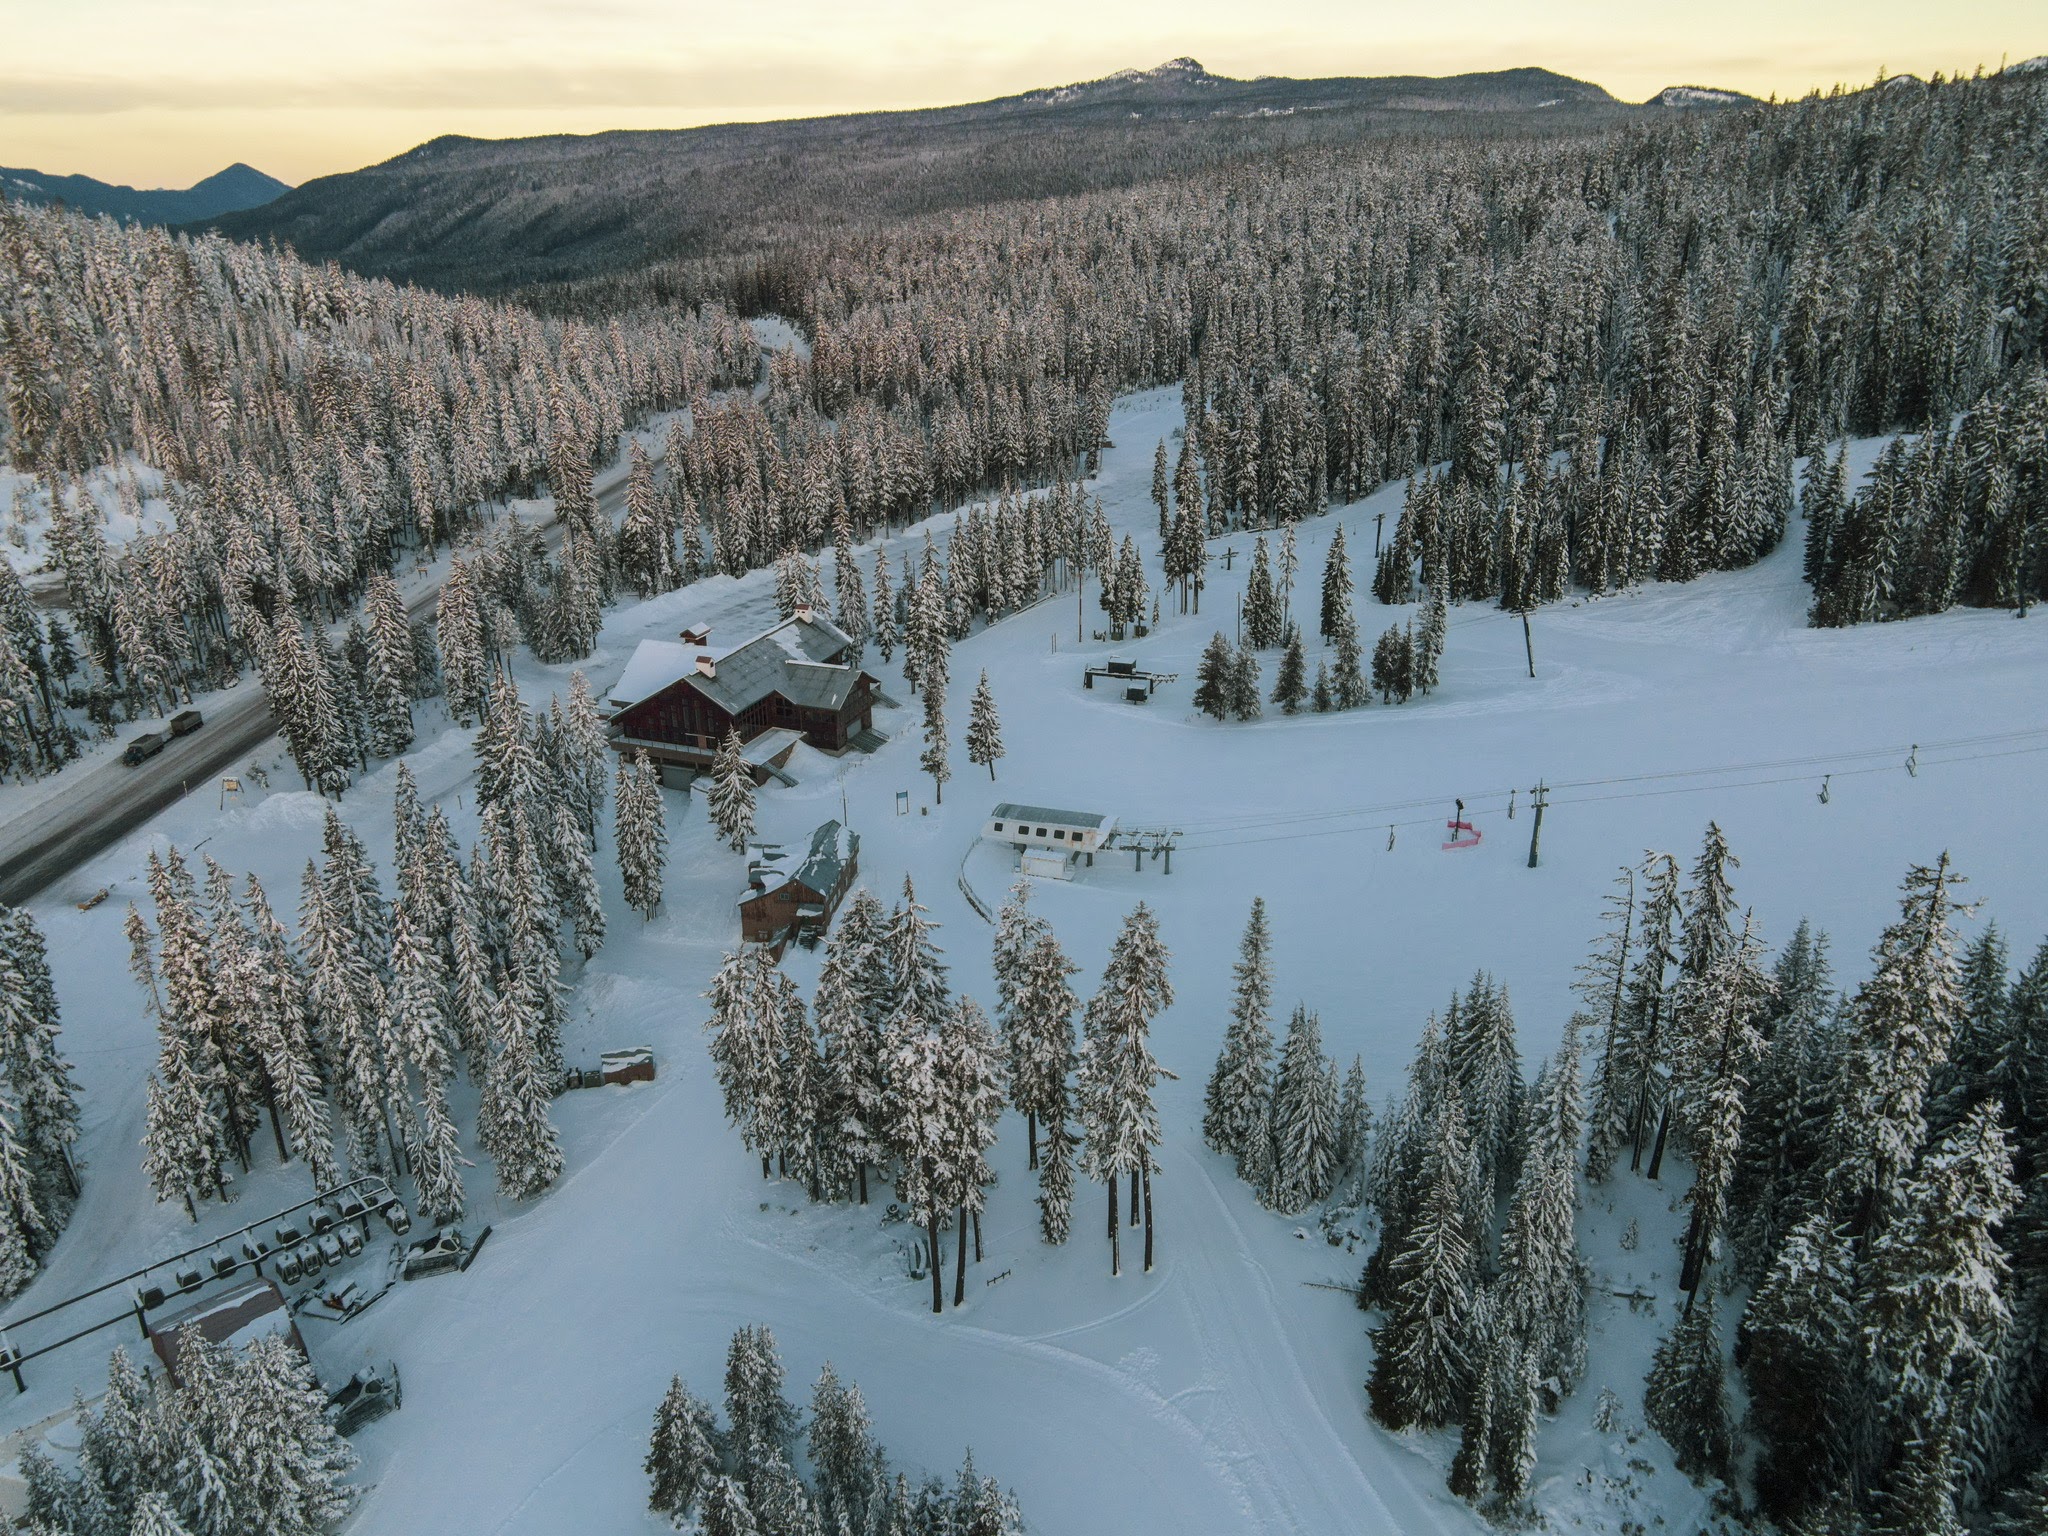 The lodge and lift at WPR sit nestled in a snowy wonderland 